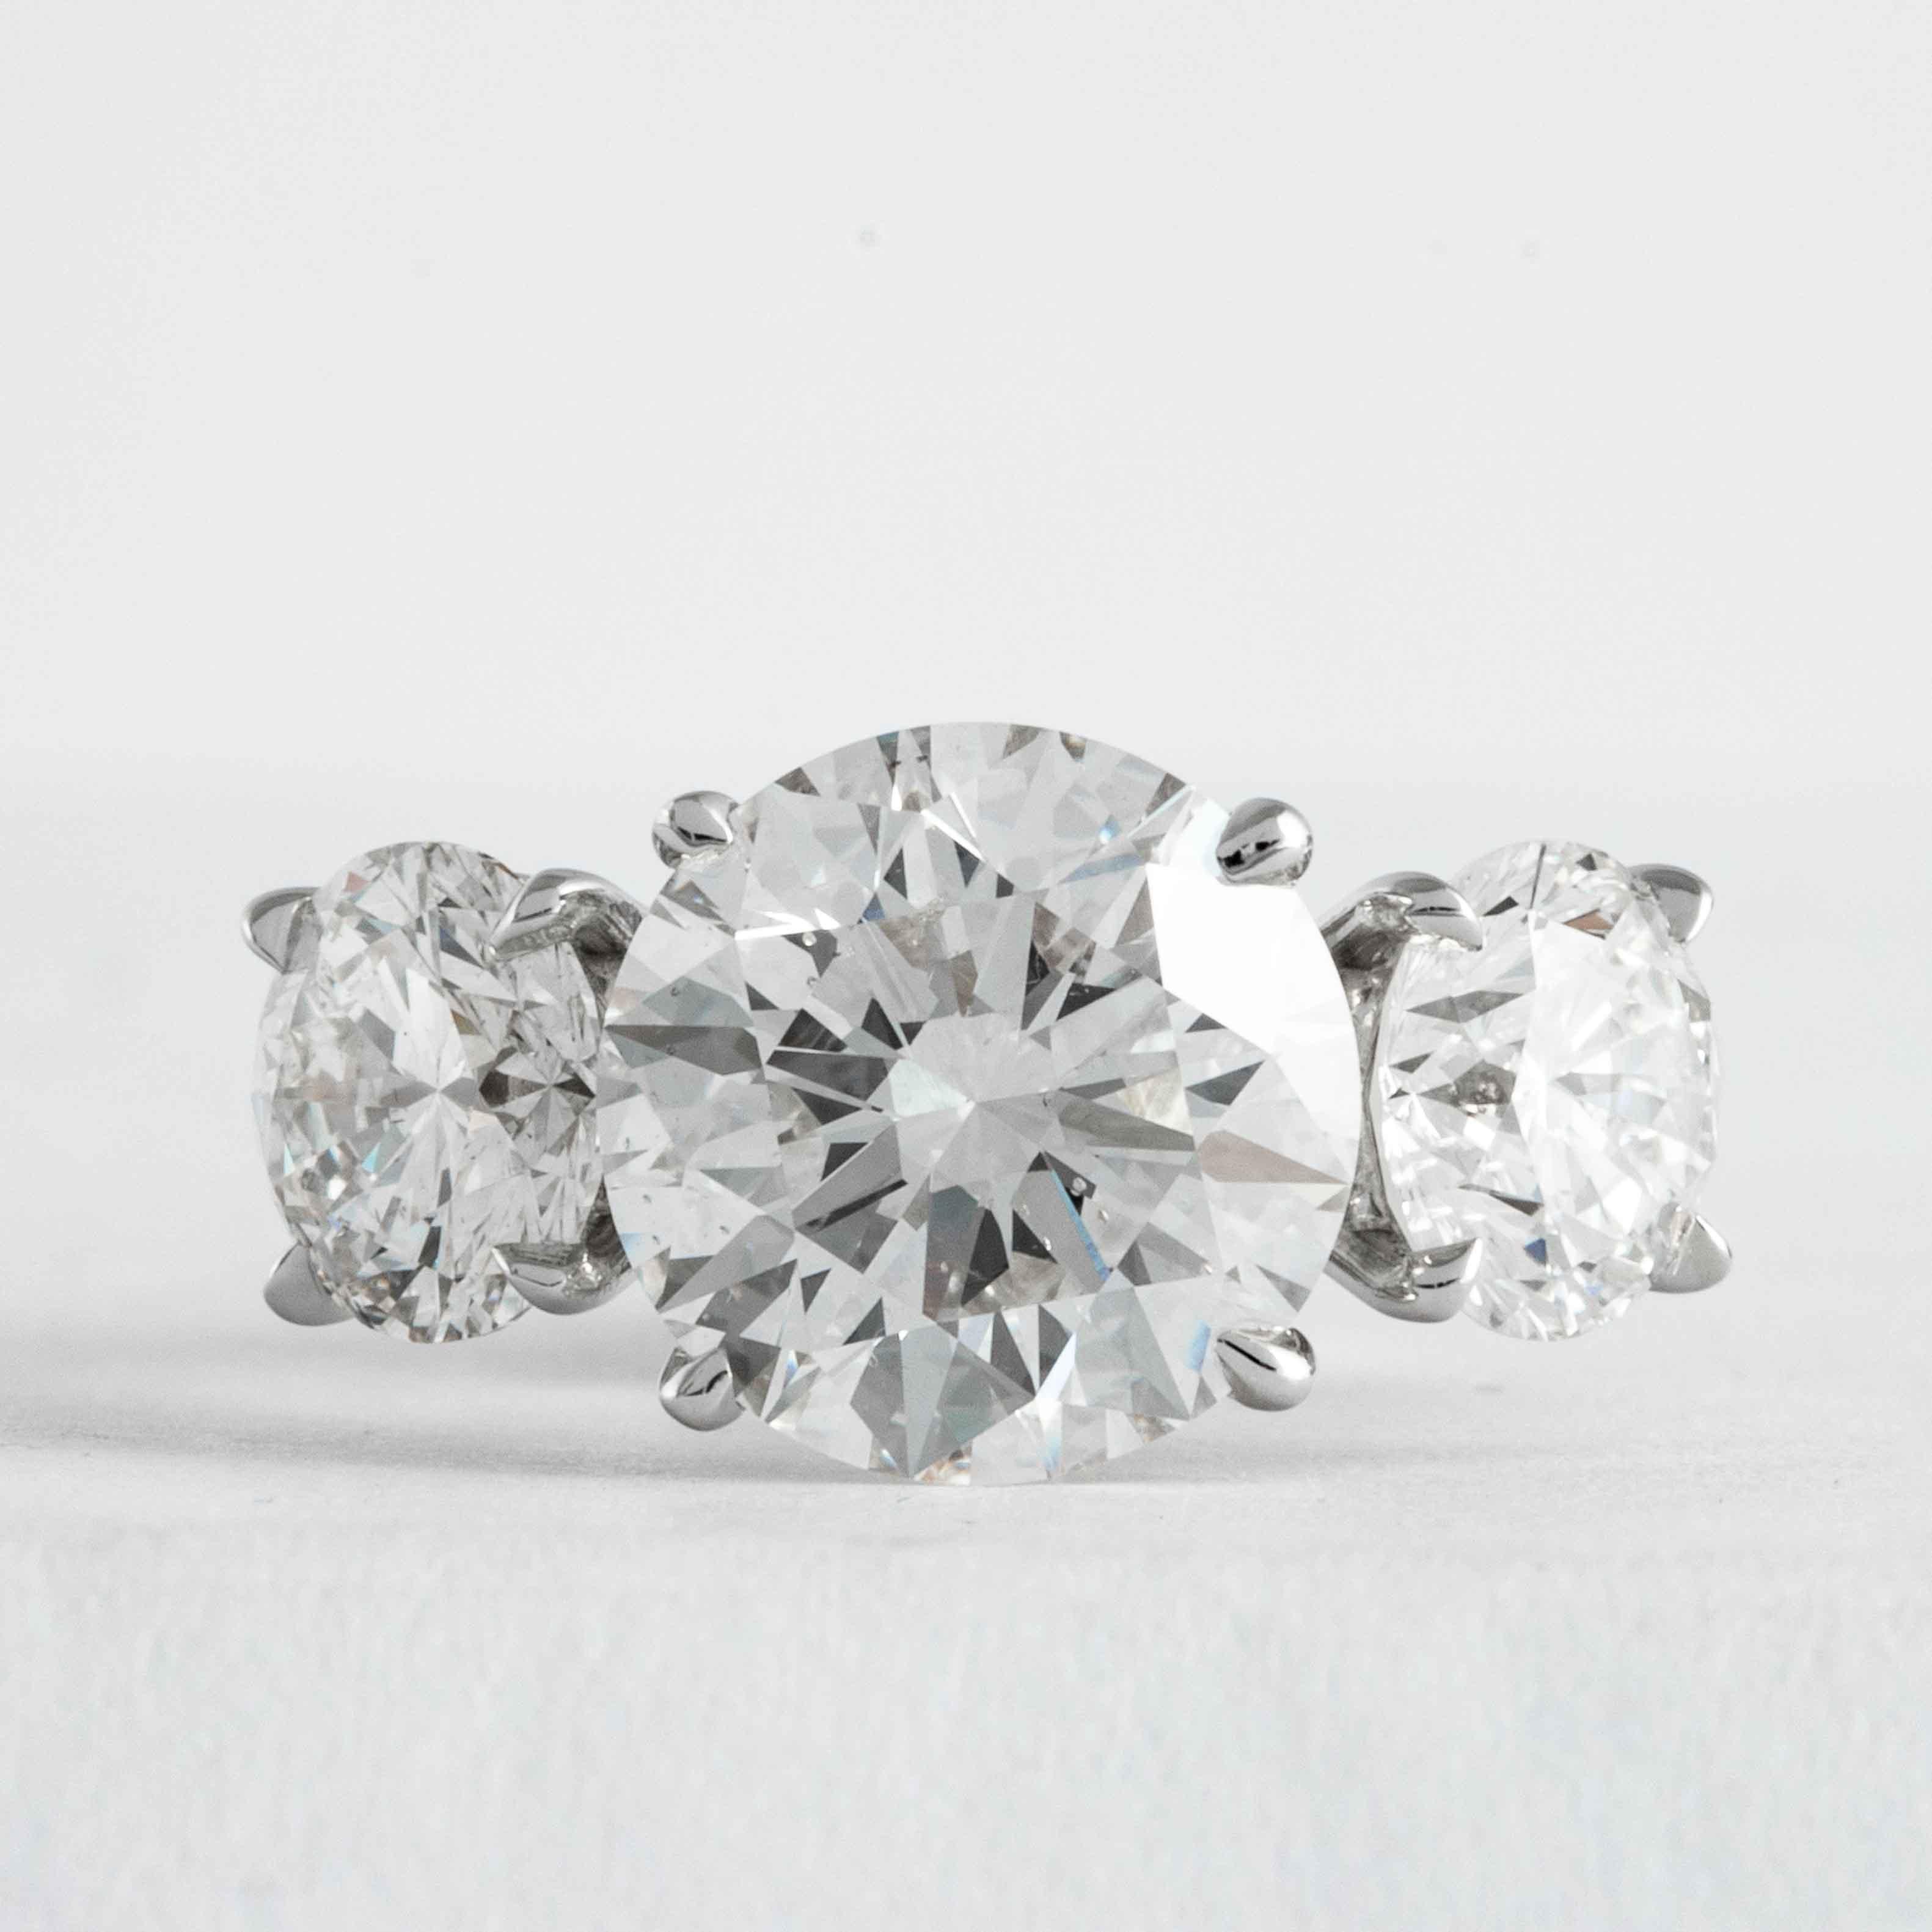 This elegant and classic diamond ring is offered by Shreve, Crump & Low. This 3.51 carat H SI1 round brilliant cut diamond is custom set in a handcrafted Shreve, Crump & Low platinum 3-stone ring. The 3.51 carat center diamond is accented by two